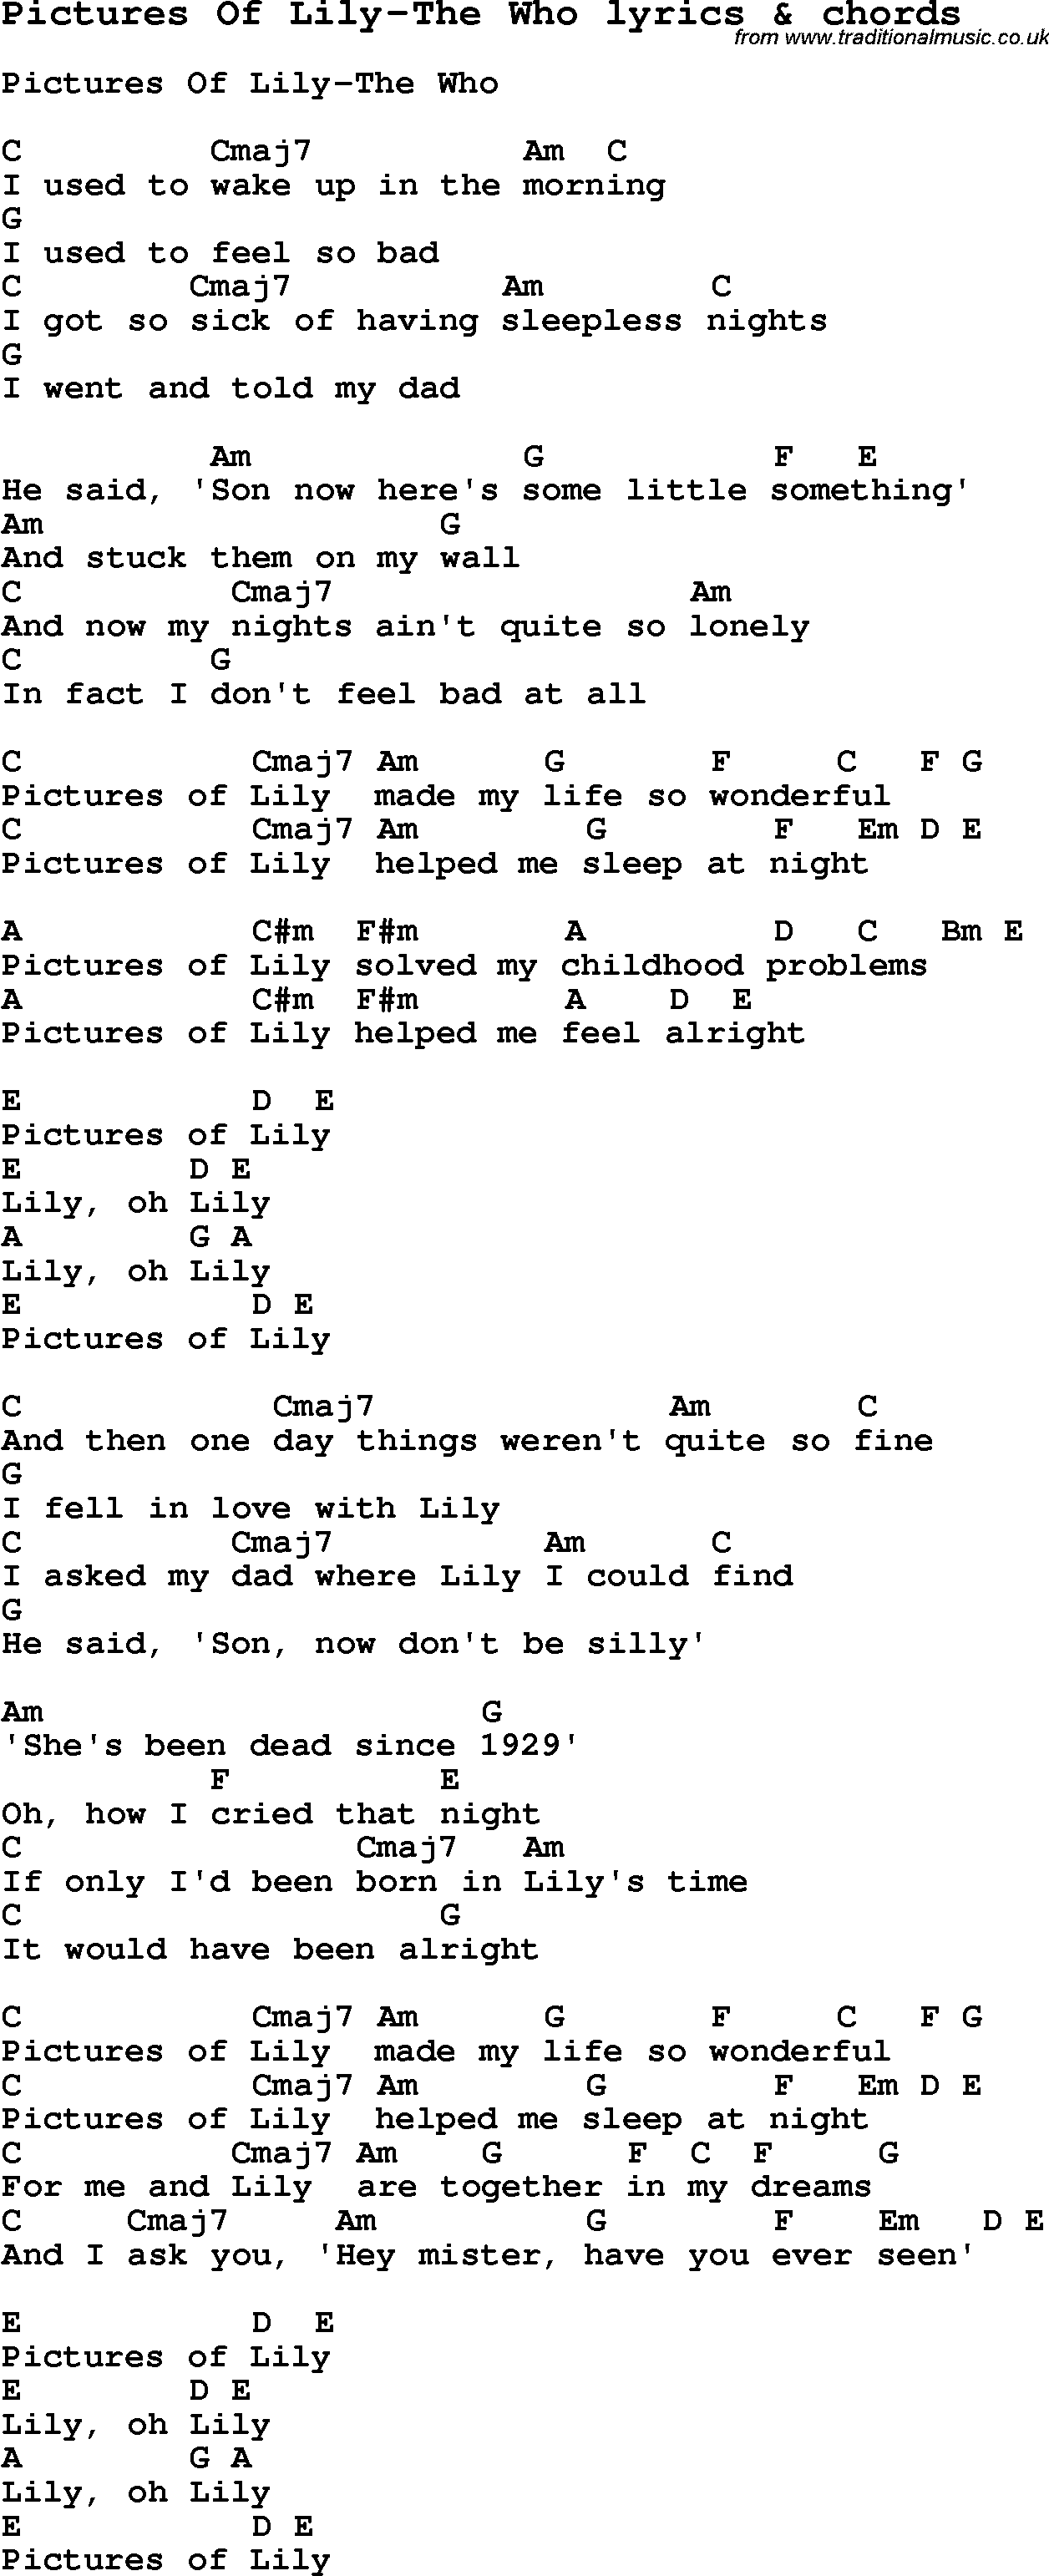 Love Song Lyrics for: Pictures Of Lily-The Who with chords for Ukulele, Guitar Banjo etc.